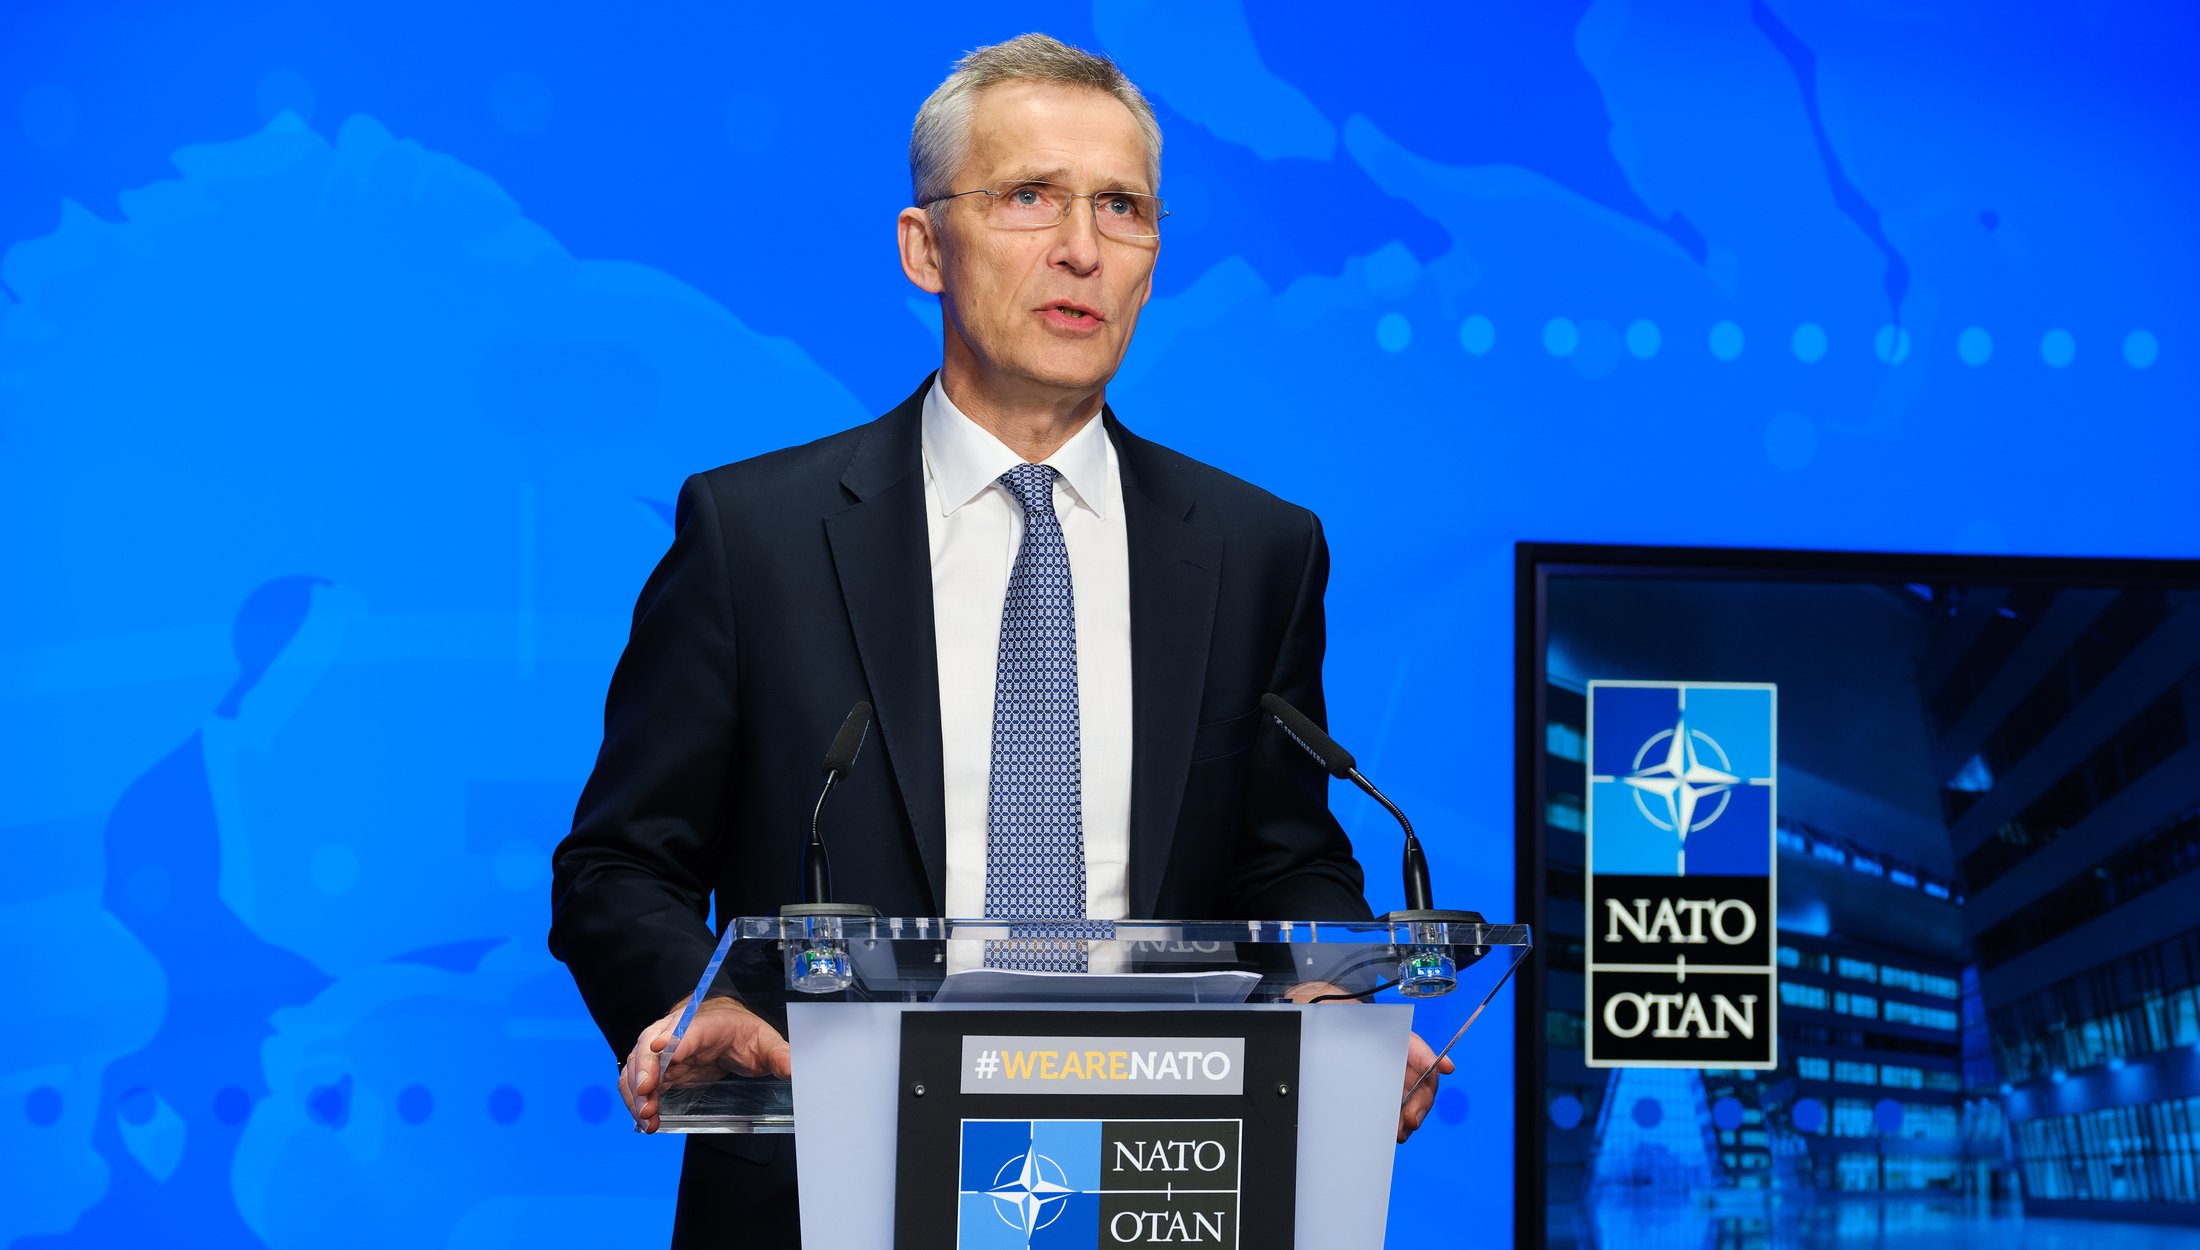 NATO Secretary General Jens Stoltenberg at the Ottawa Conference on Security and Defence